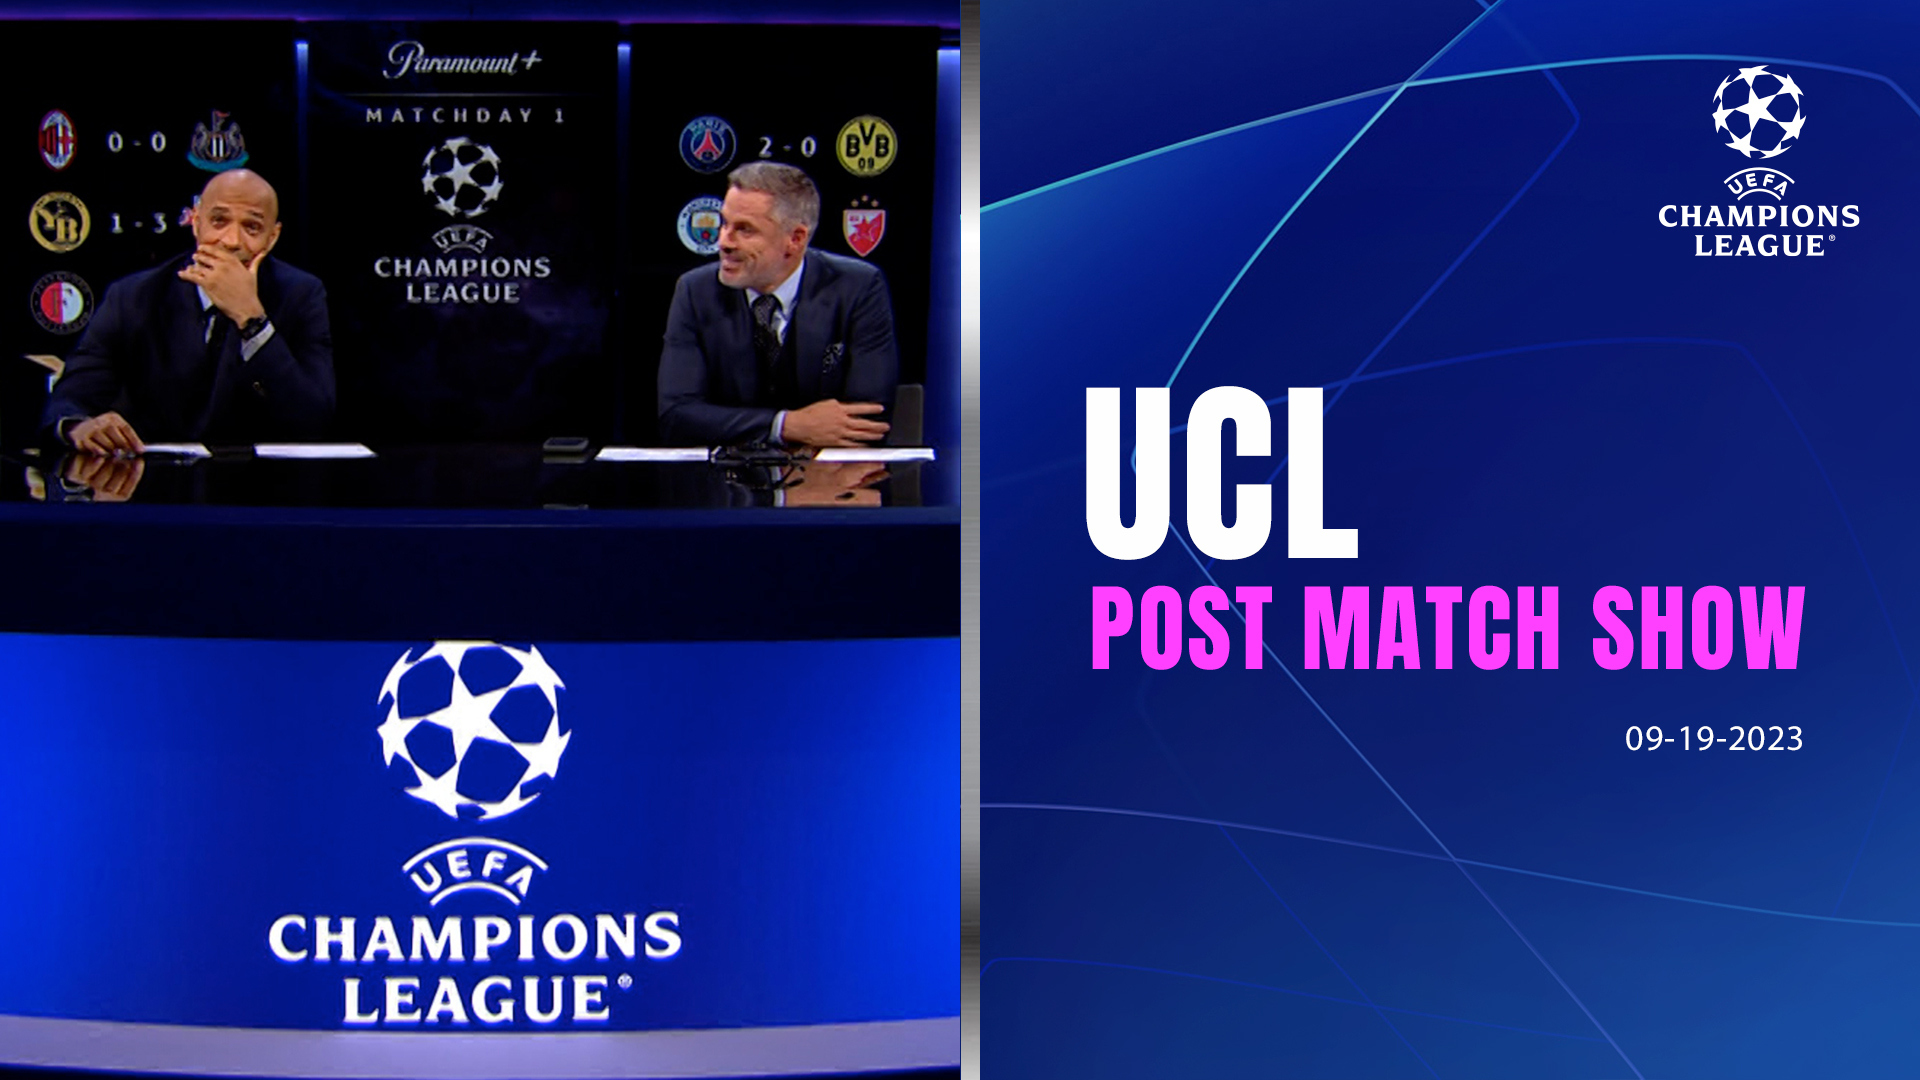 Watch UEFA Champions League: Champions League Today Post Match Show -  09/19/2023 - Full show on Paramount Plus